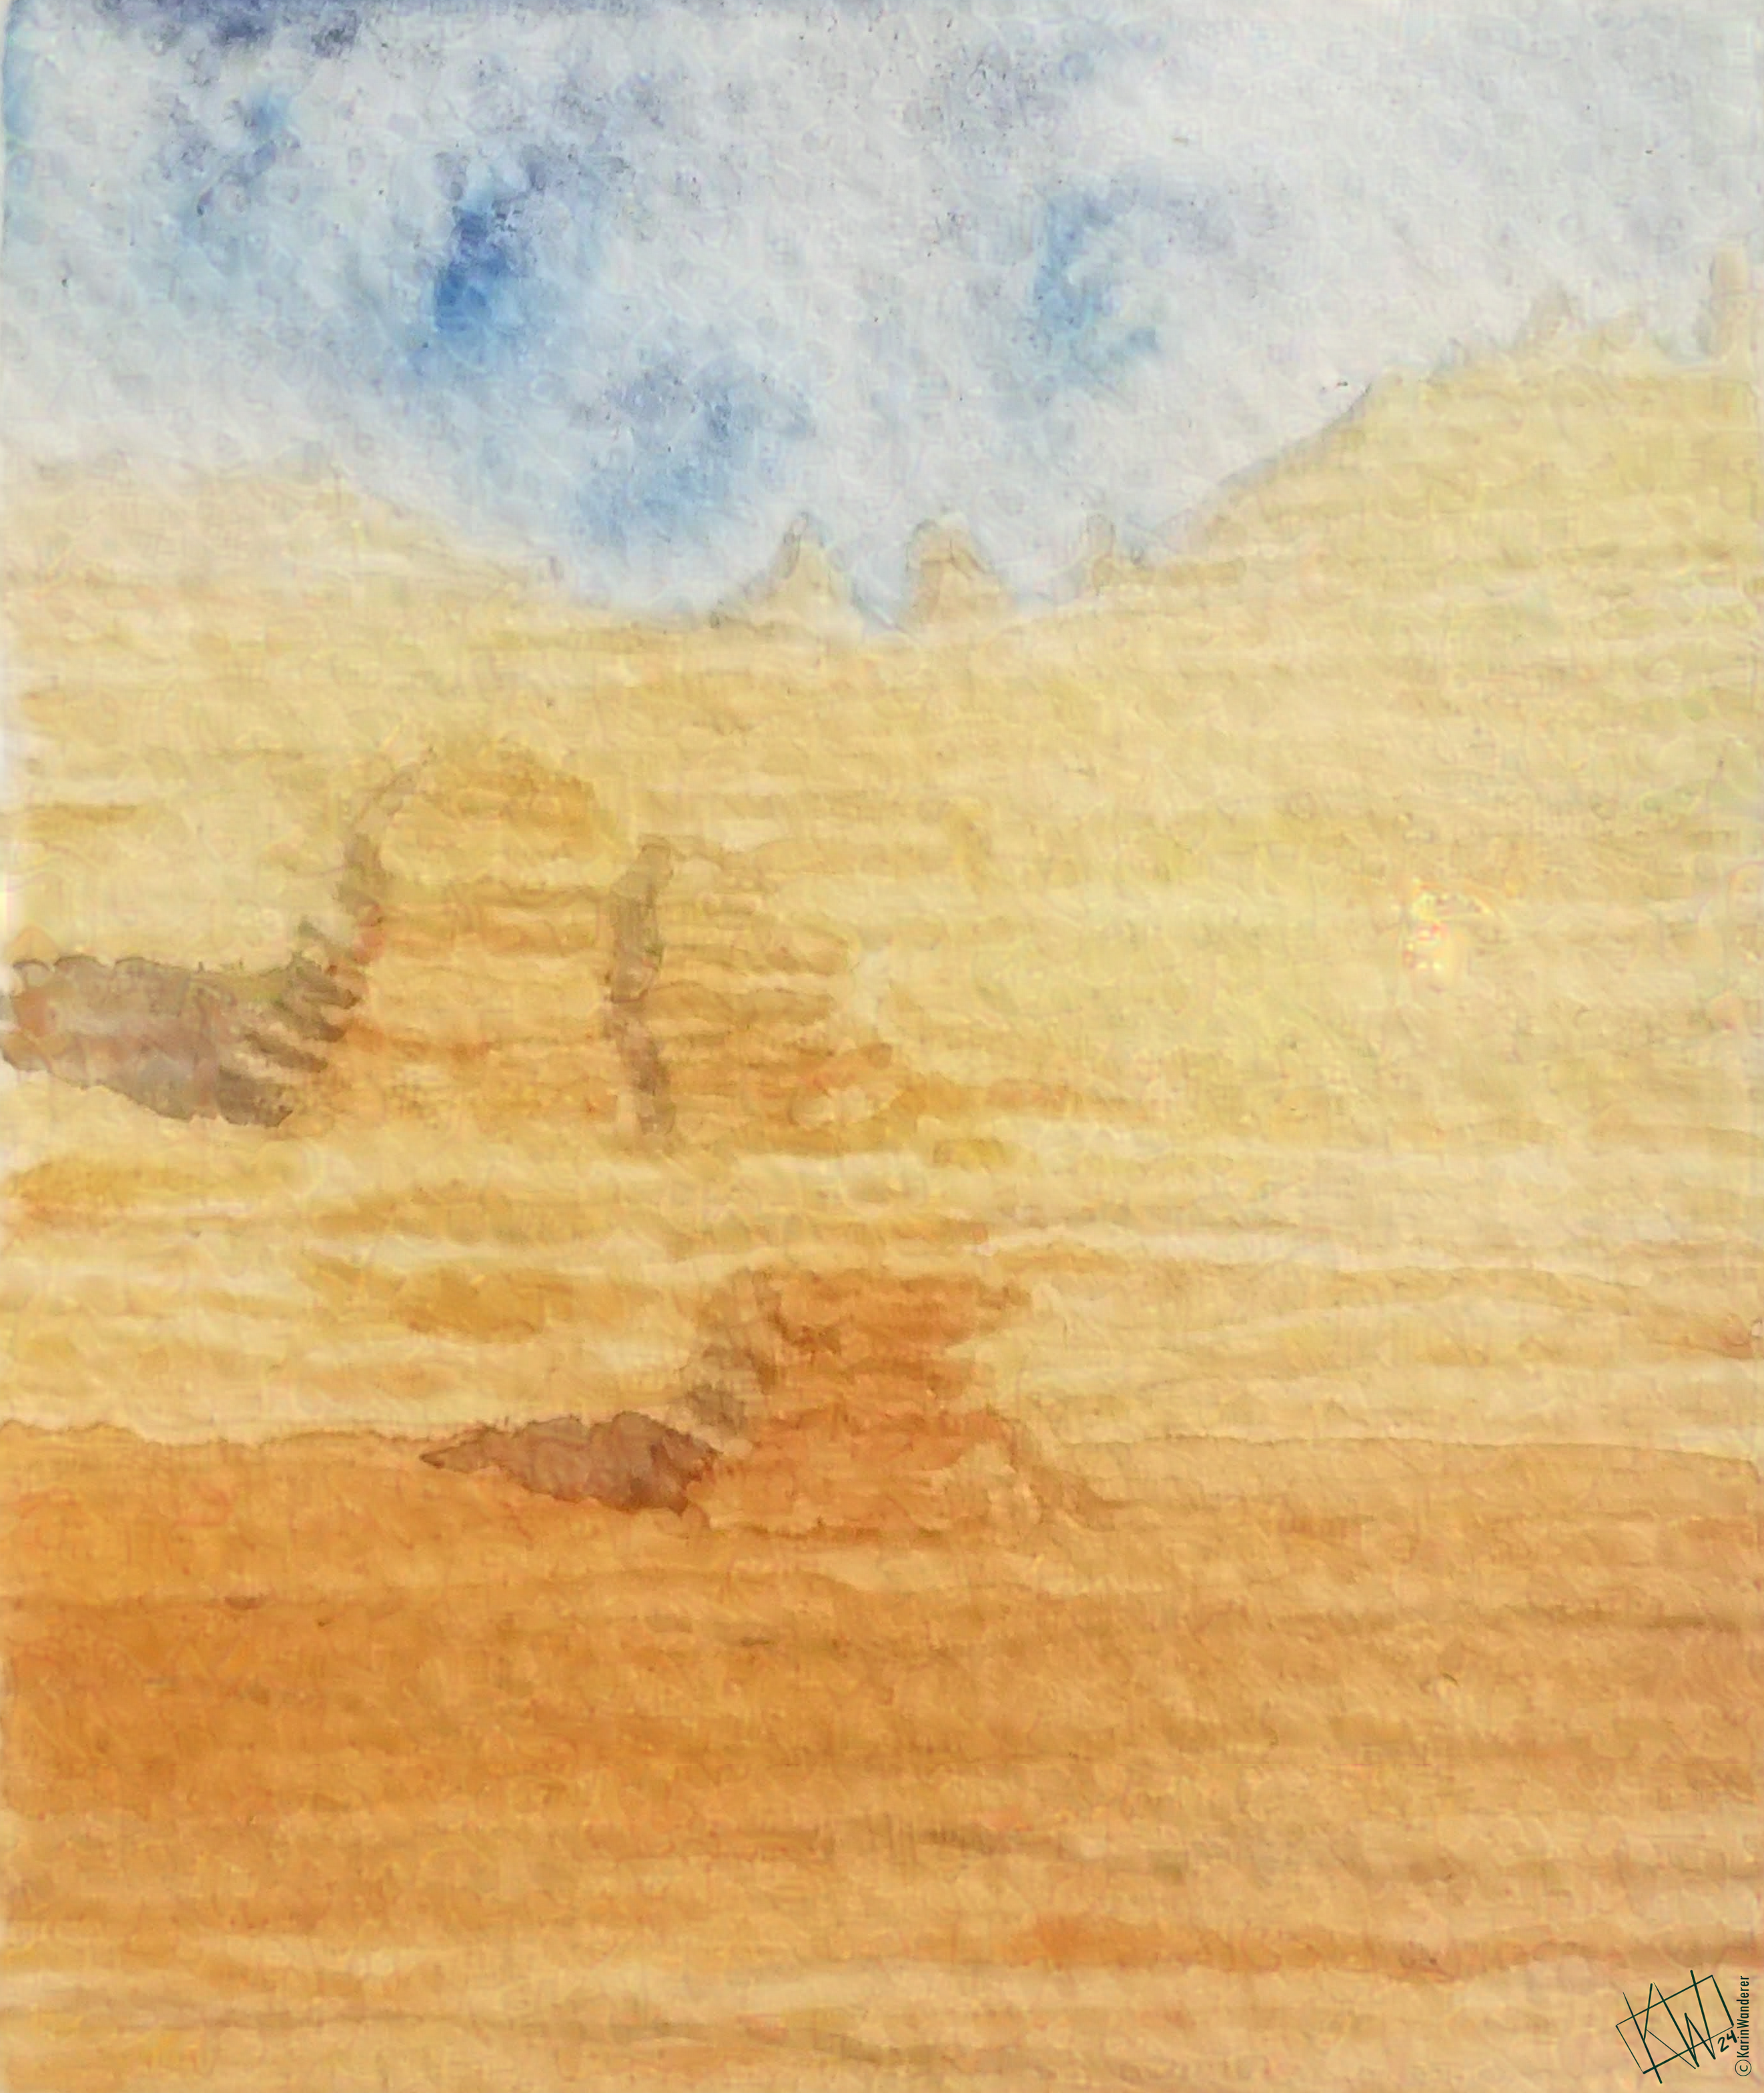 Watercolor landscape with sandstone formations rising from the sand under a partly-cloudy sky.